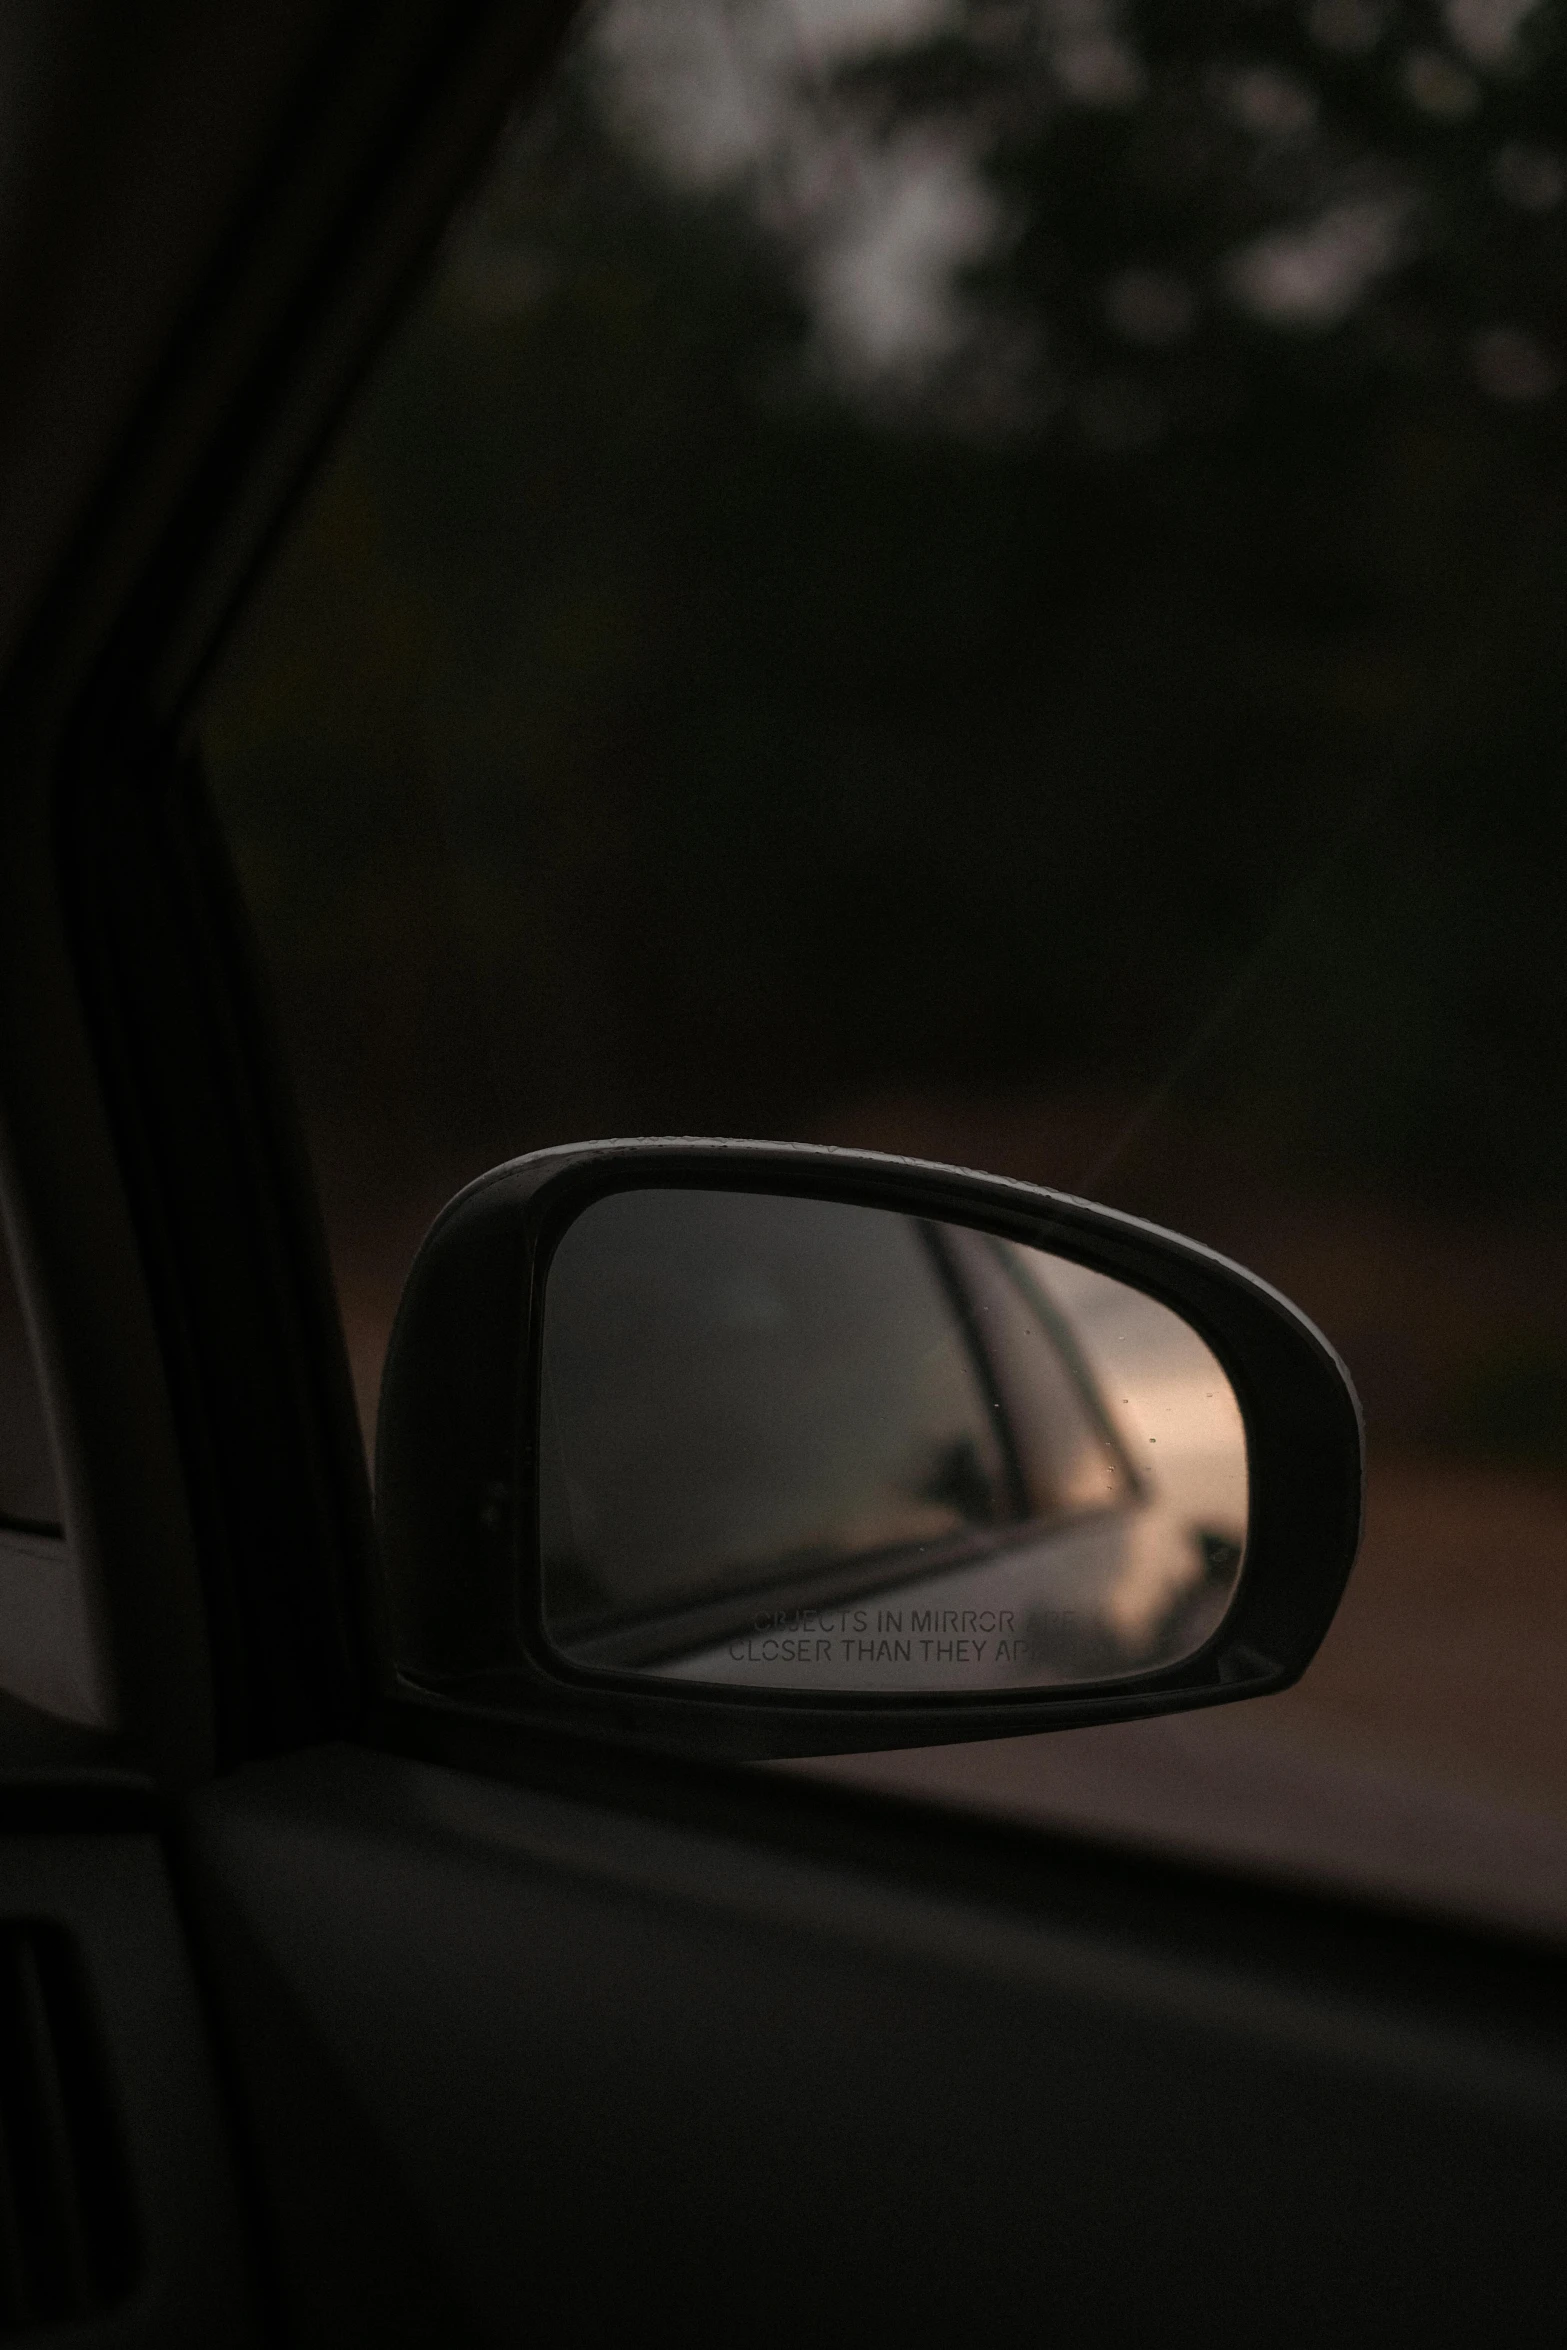 the rear view mirror of a car shows the tree outside the window